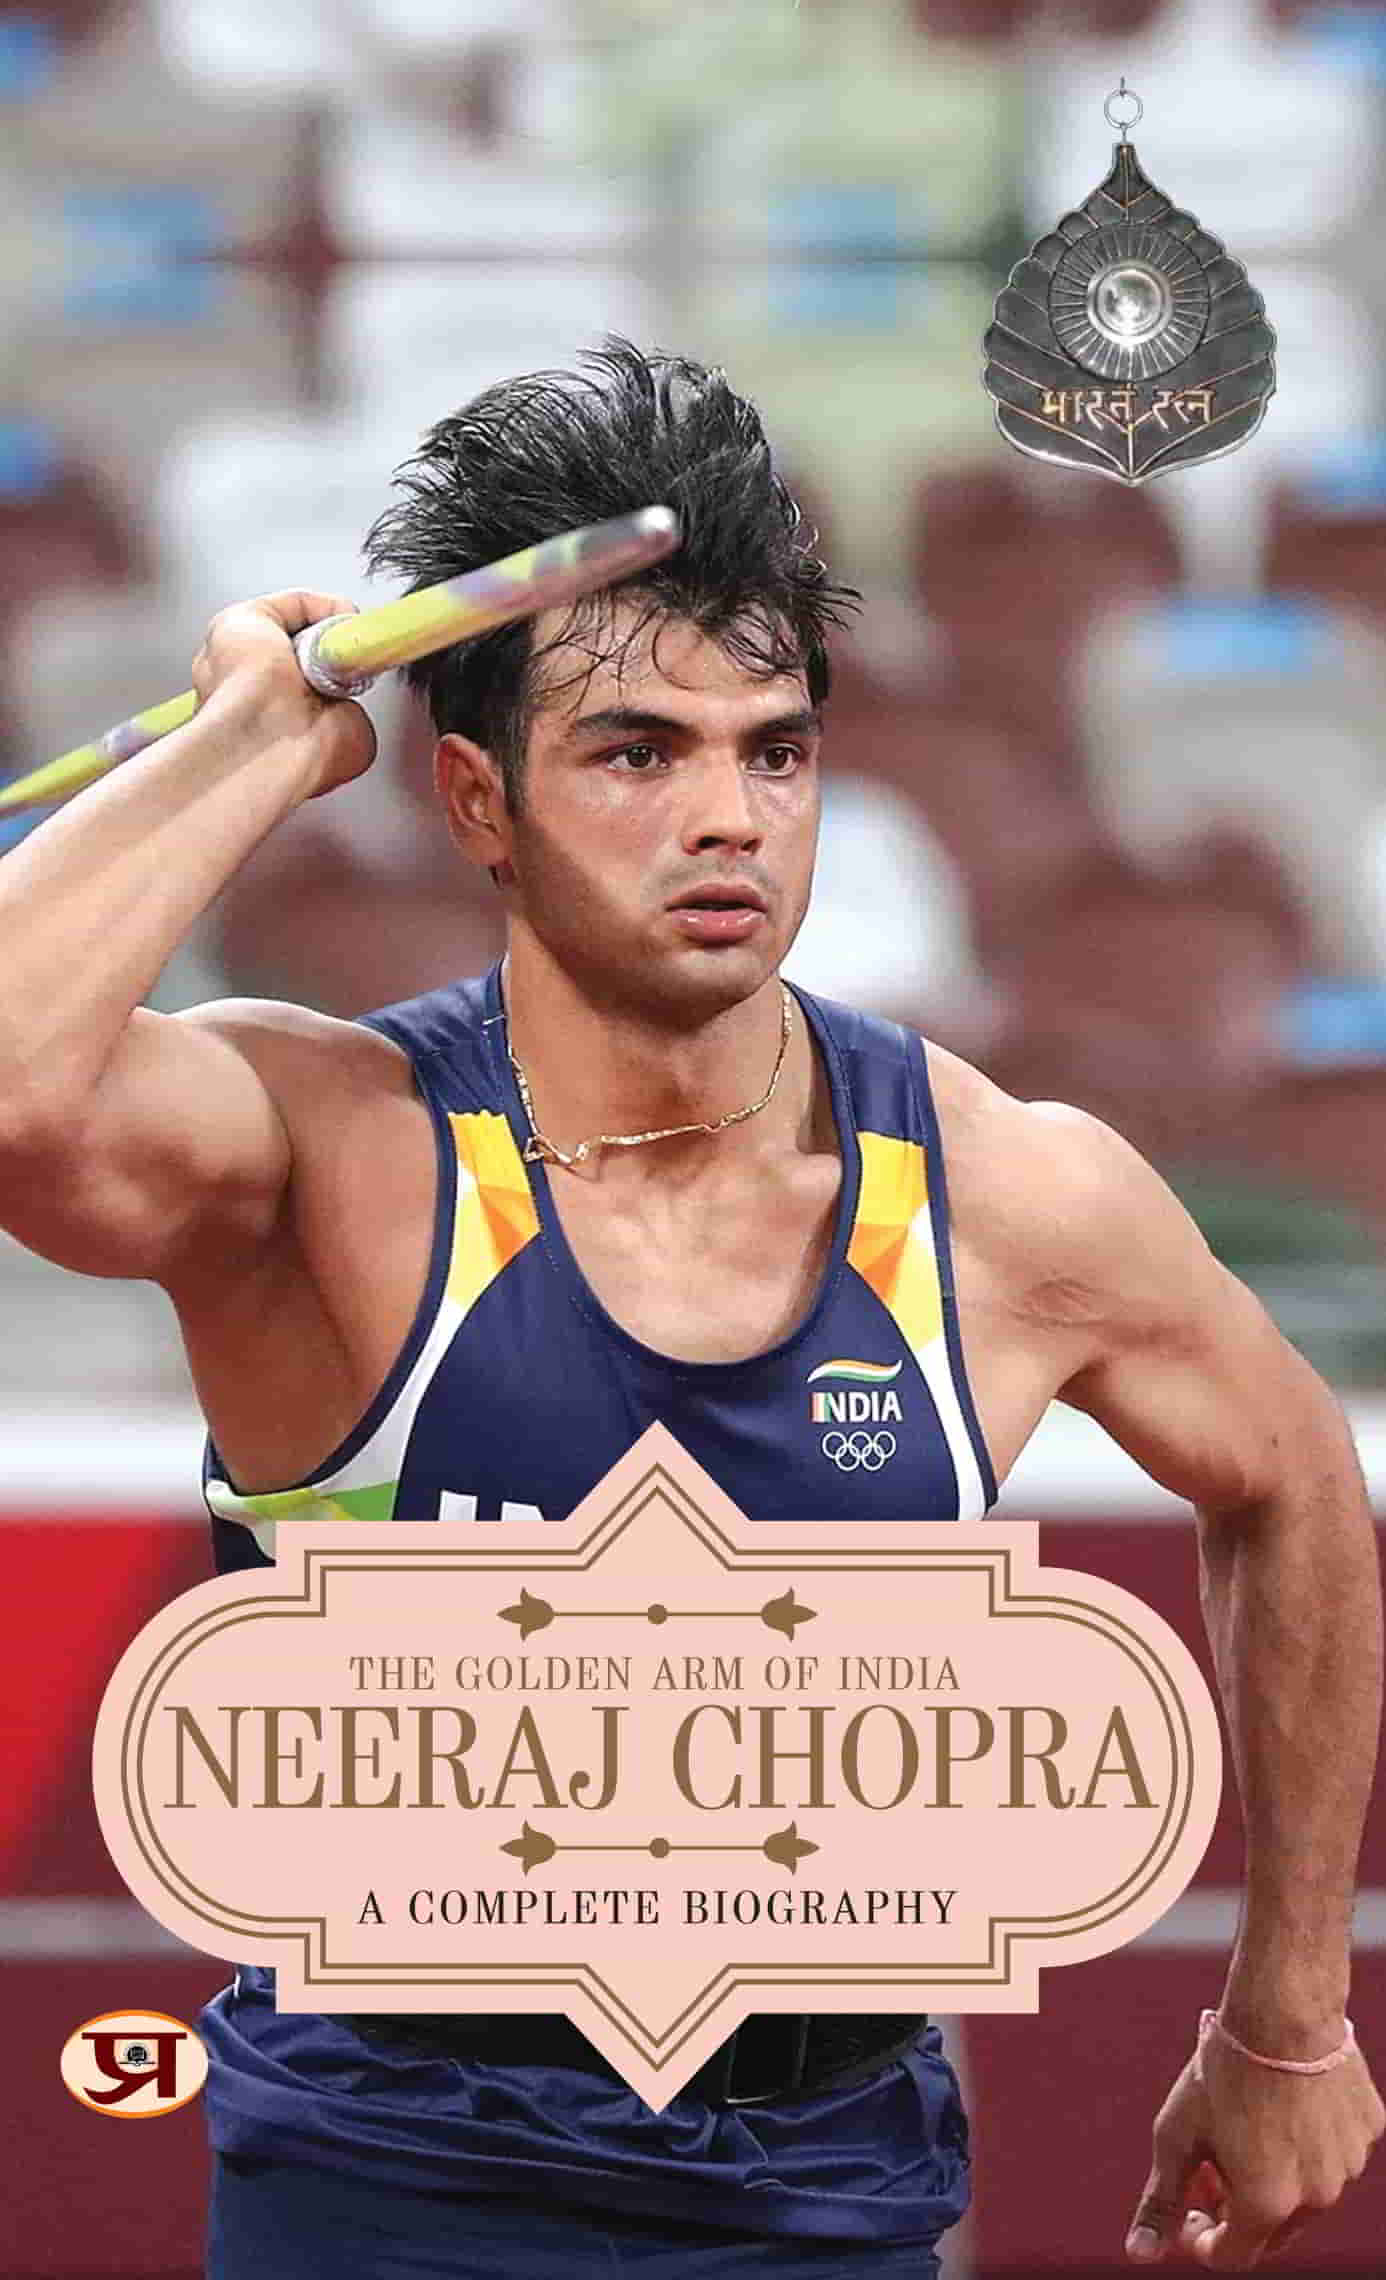 Neeraj Chopra: A Complete Biography | The Golden Arm of India | From a Small Town To Olympic Gold | Inspiring Journey To Motivate The Youth